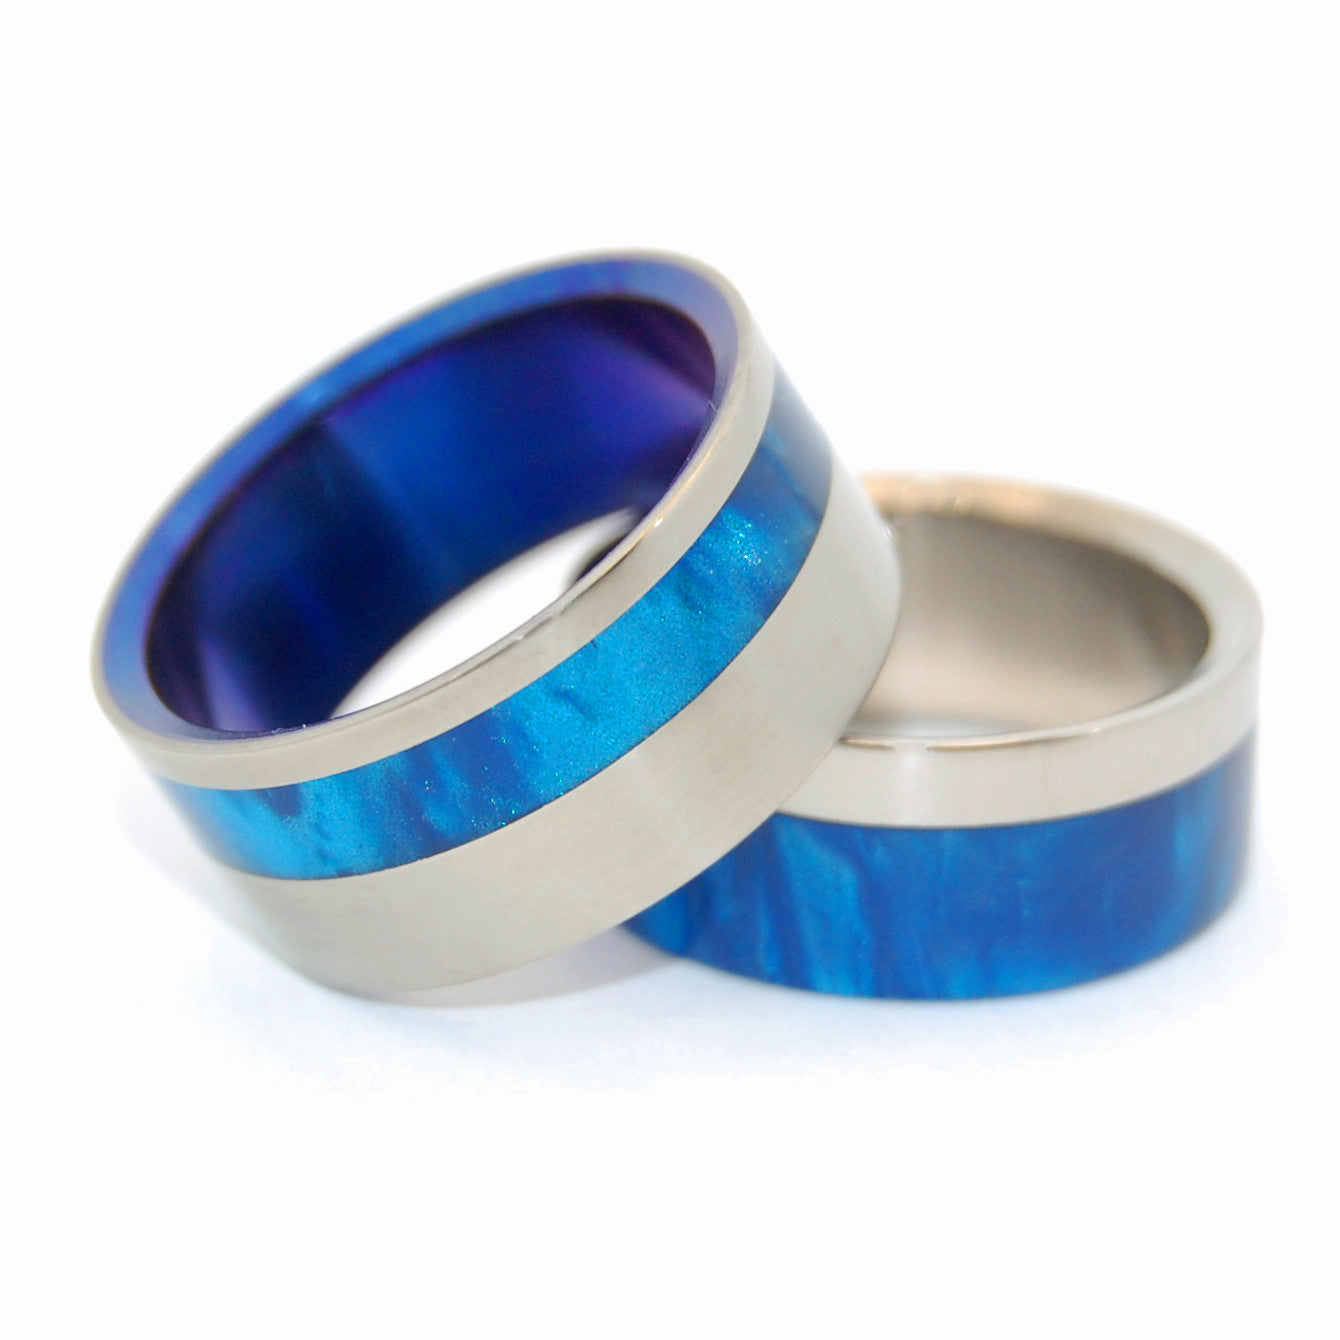 TO THE WINDS PROMISE | Blue Marbled Resin & Titanium - Unique Wedding Rings - Wedding Rings Set - Minter and Richter Designs